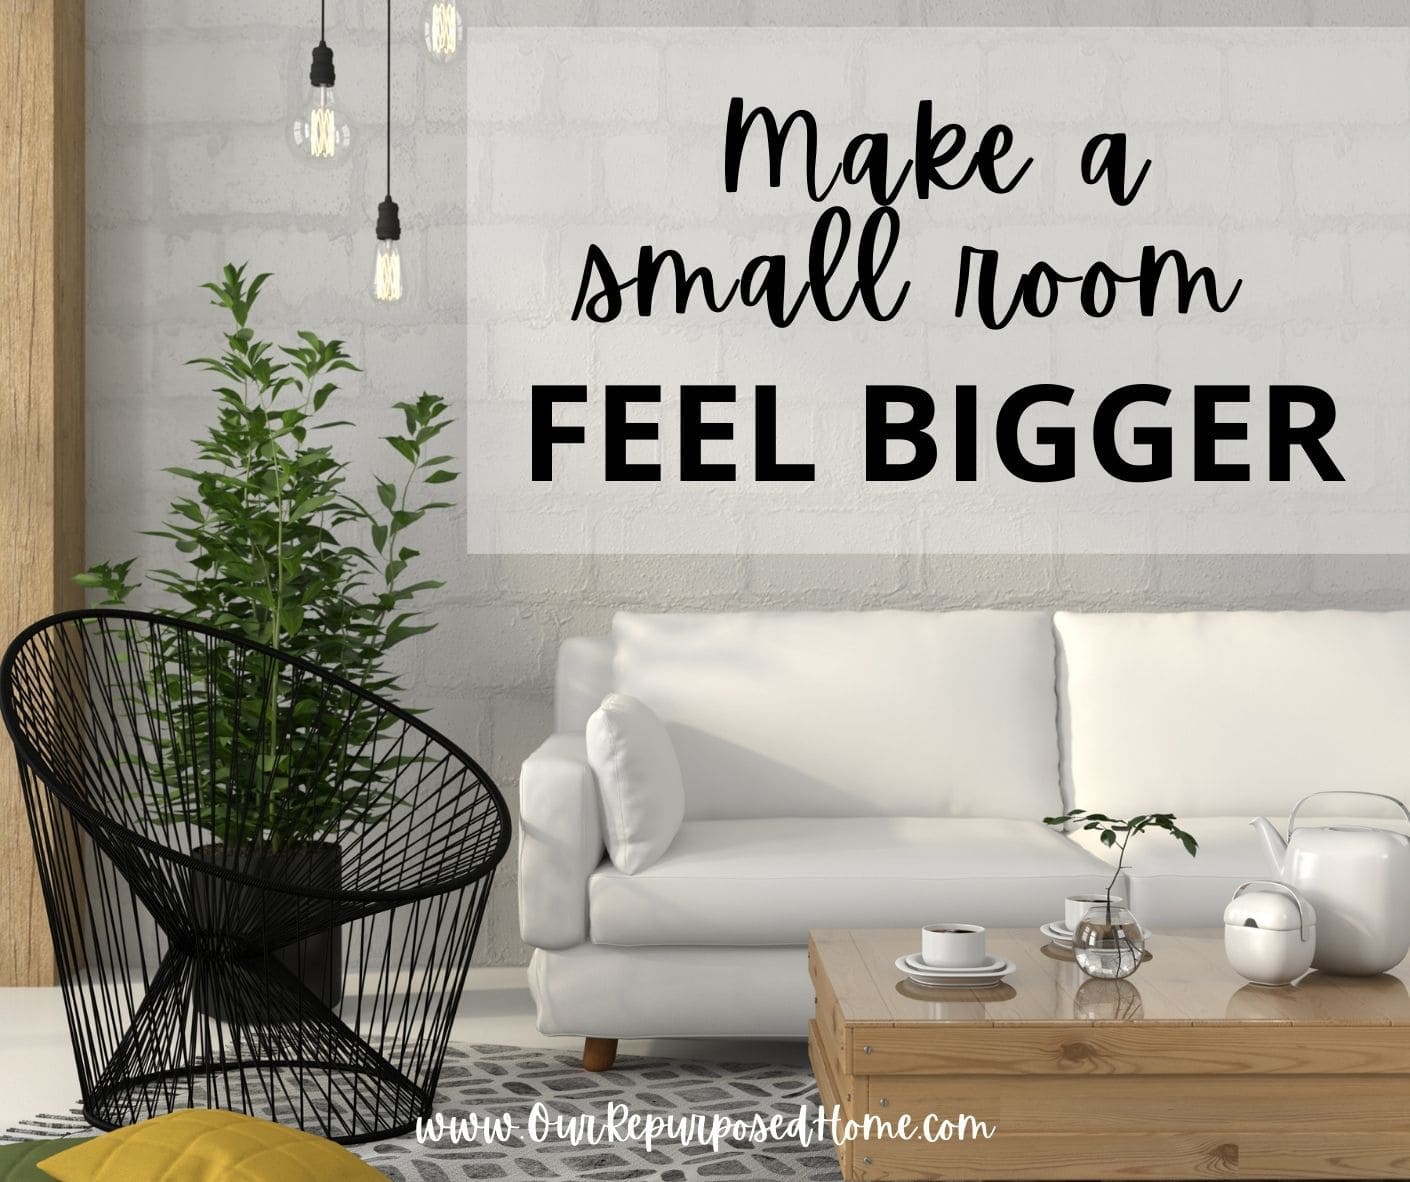 How to make a small room feel bigger